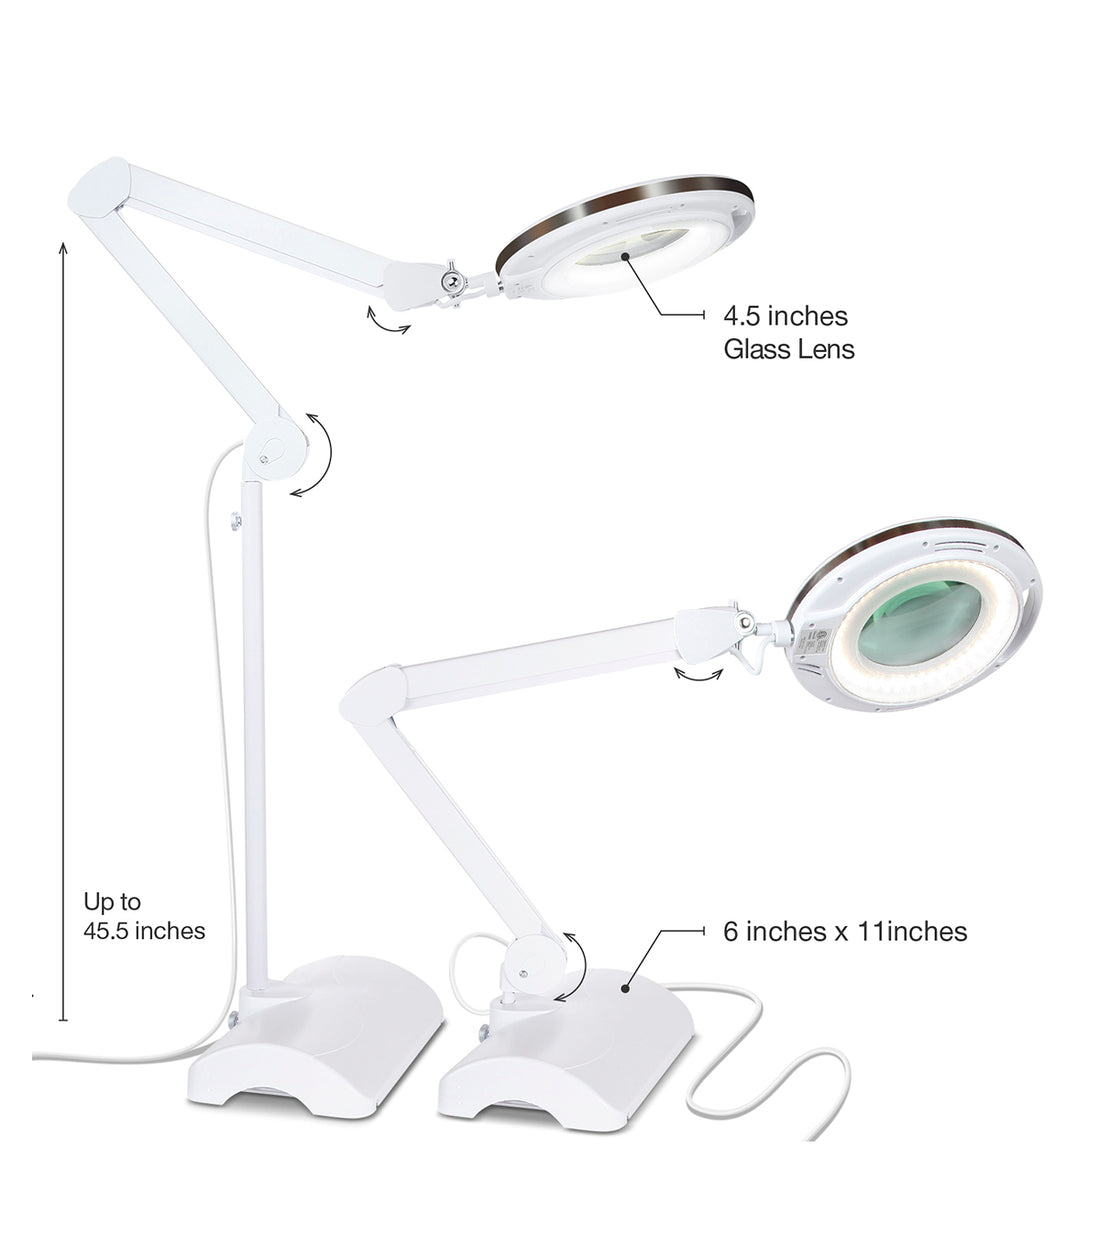 Brightech LightView Pro 2 in 1 - Bright LED Magnifying Lamp Converts from Table to Floor Lamp - Real Diopter Glass Magnifier with Light - for Crafts & Professional Use: Facial, Lash Extension, Etc